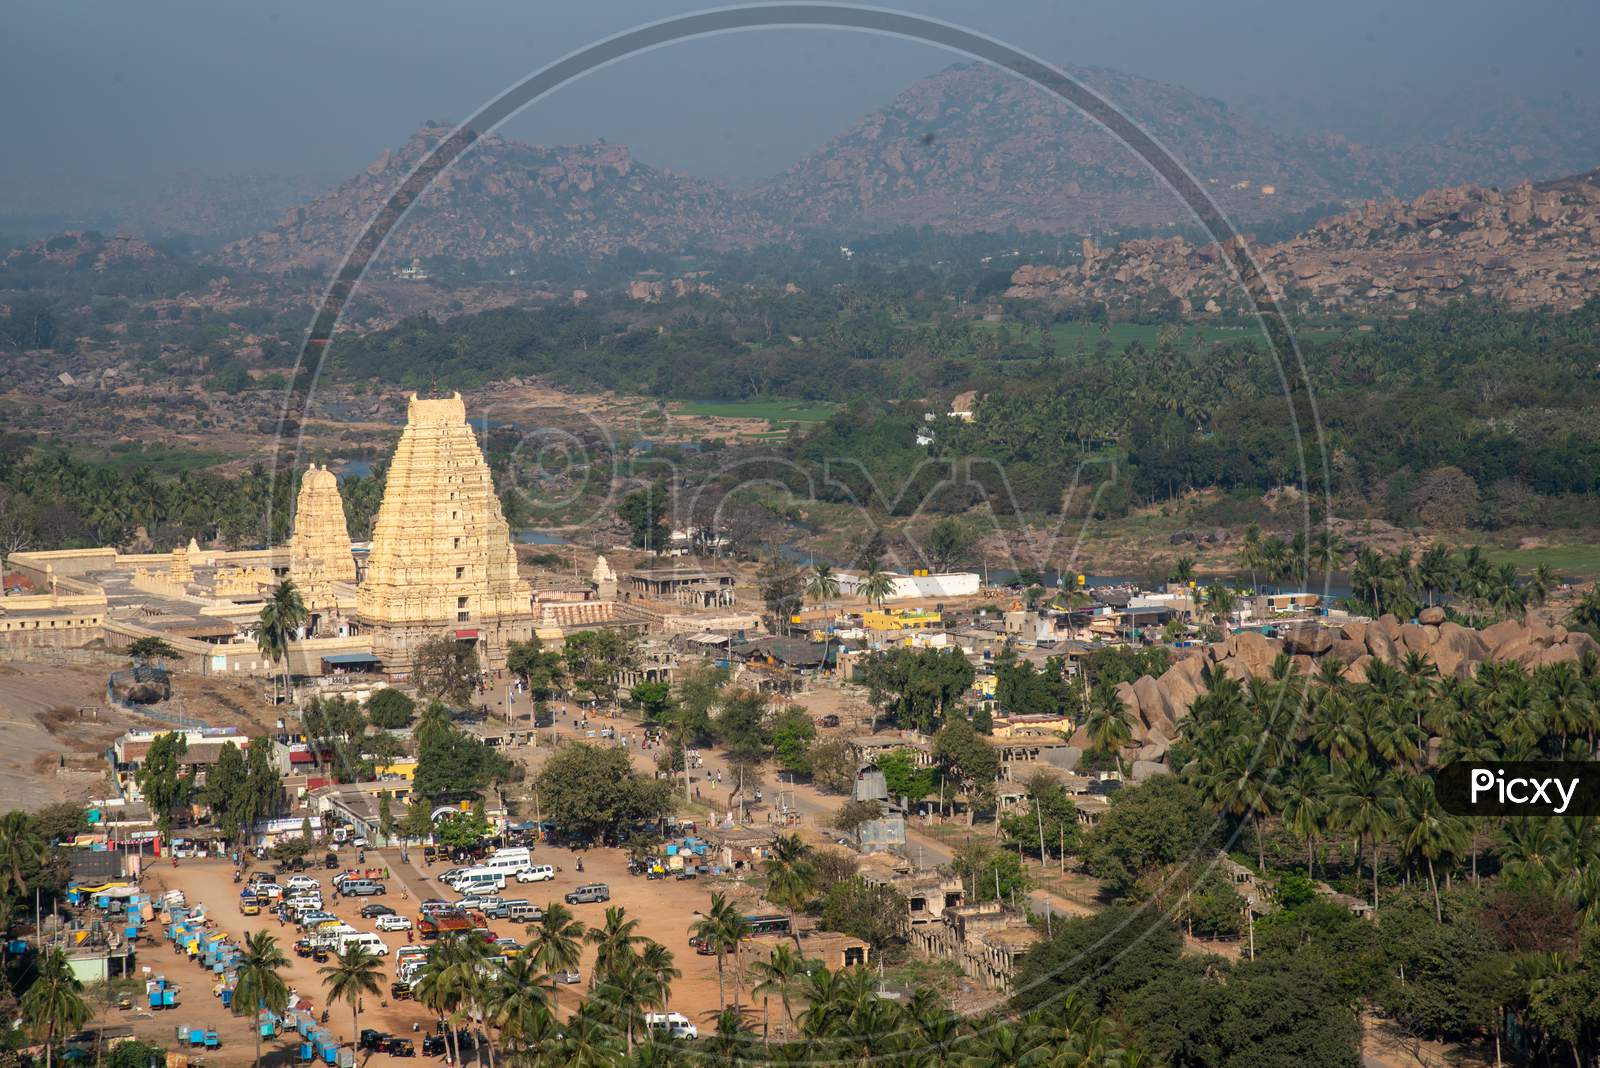 Aerial View of Virupaksha Temple from Matanga Hills with Mountains in the Background